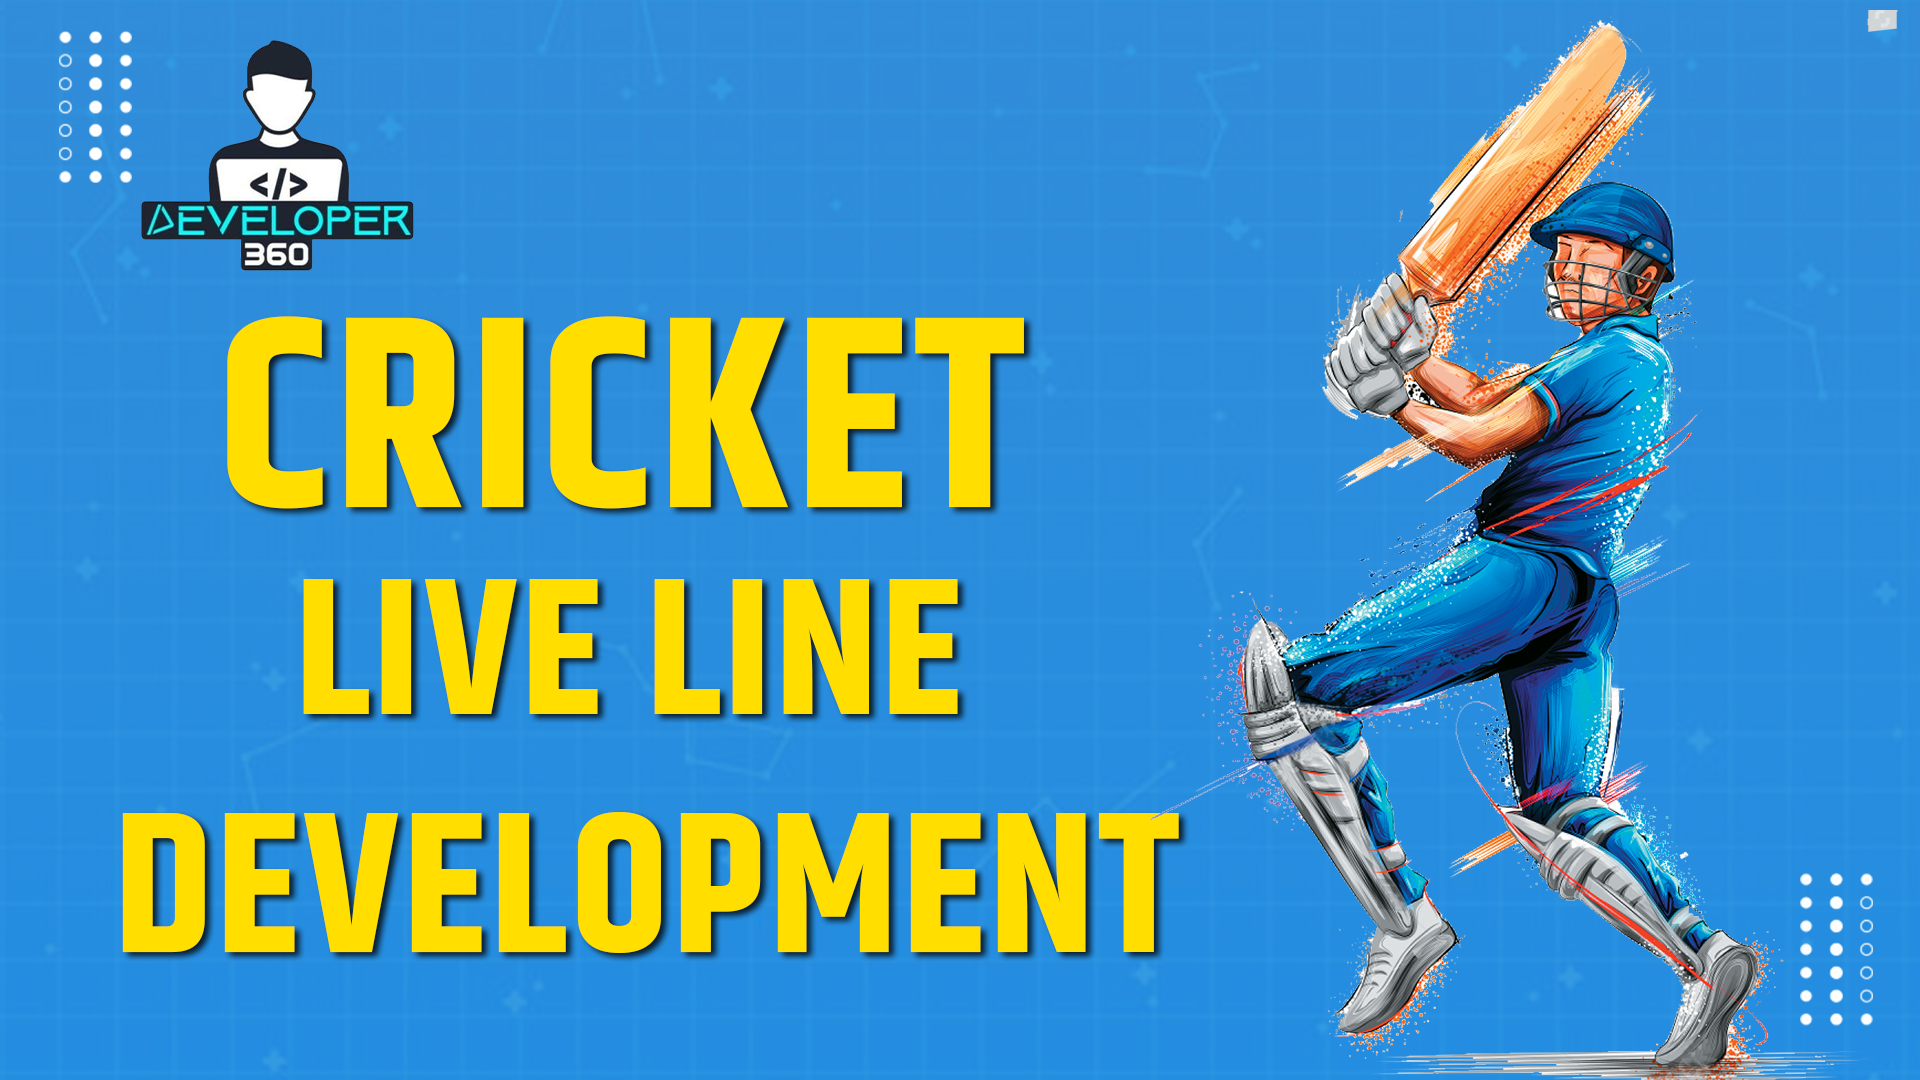 Cricket Live Line App Development And Cost